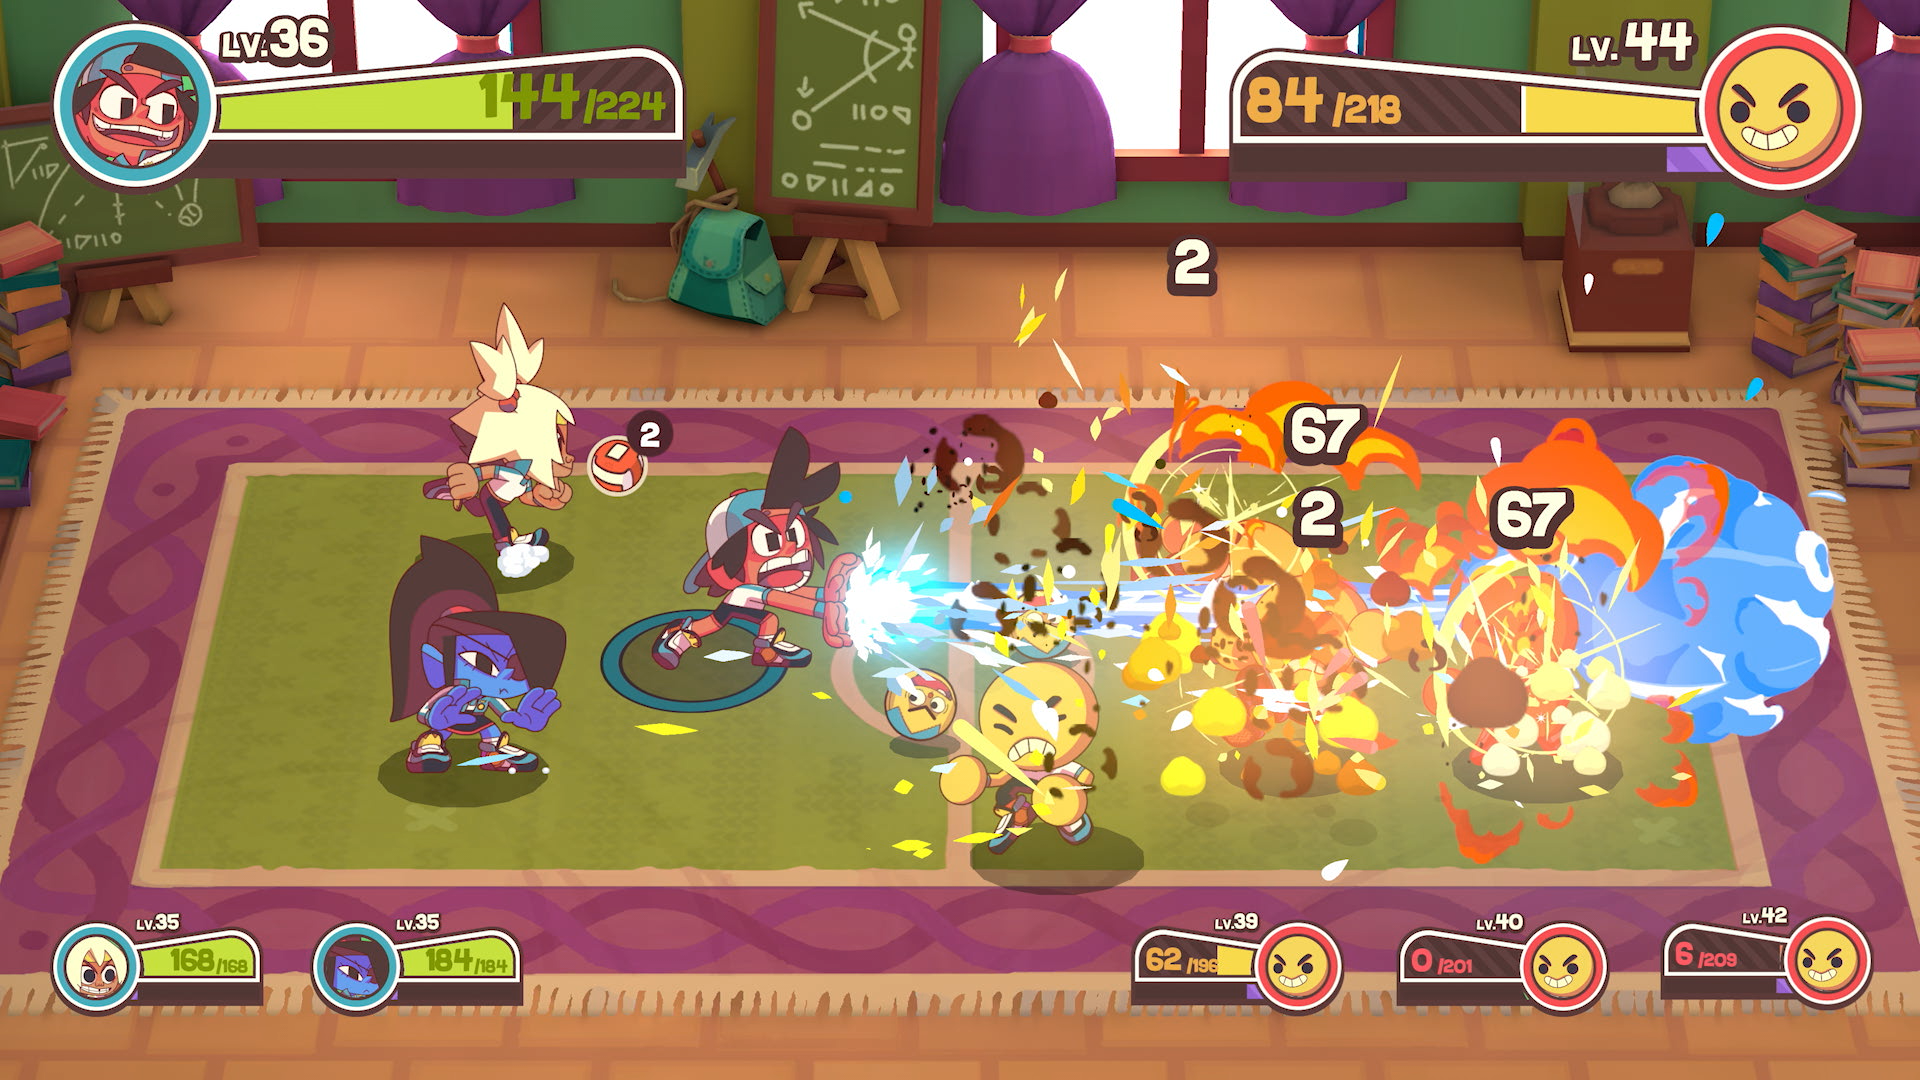 A screenshot of Dodgeball Academia’s combat system. There are three characters on each side of a dodgeball court. On the left side is the player’s team, with Otto in the middle. He is screaming as he unleashes a sort of kame kame ha move toward the opposing team, blanketing them in flame.